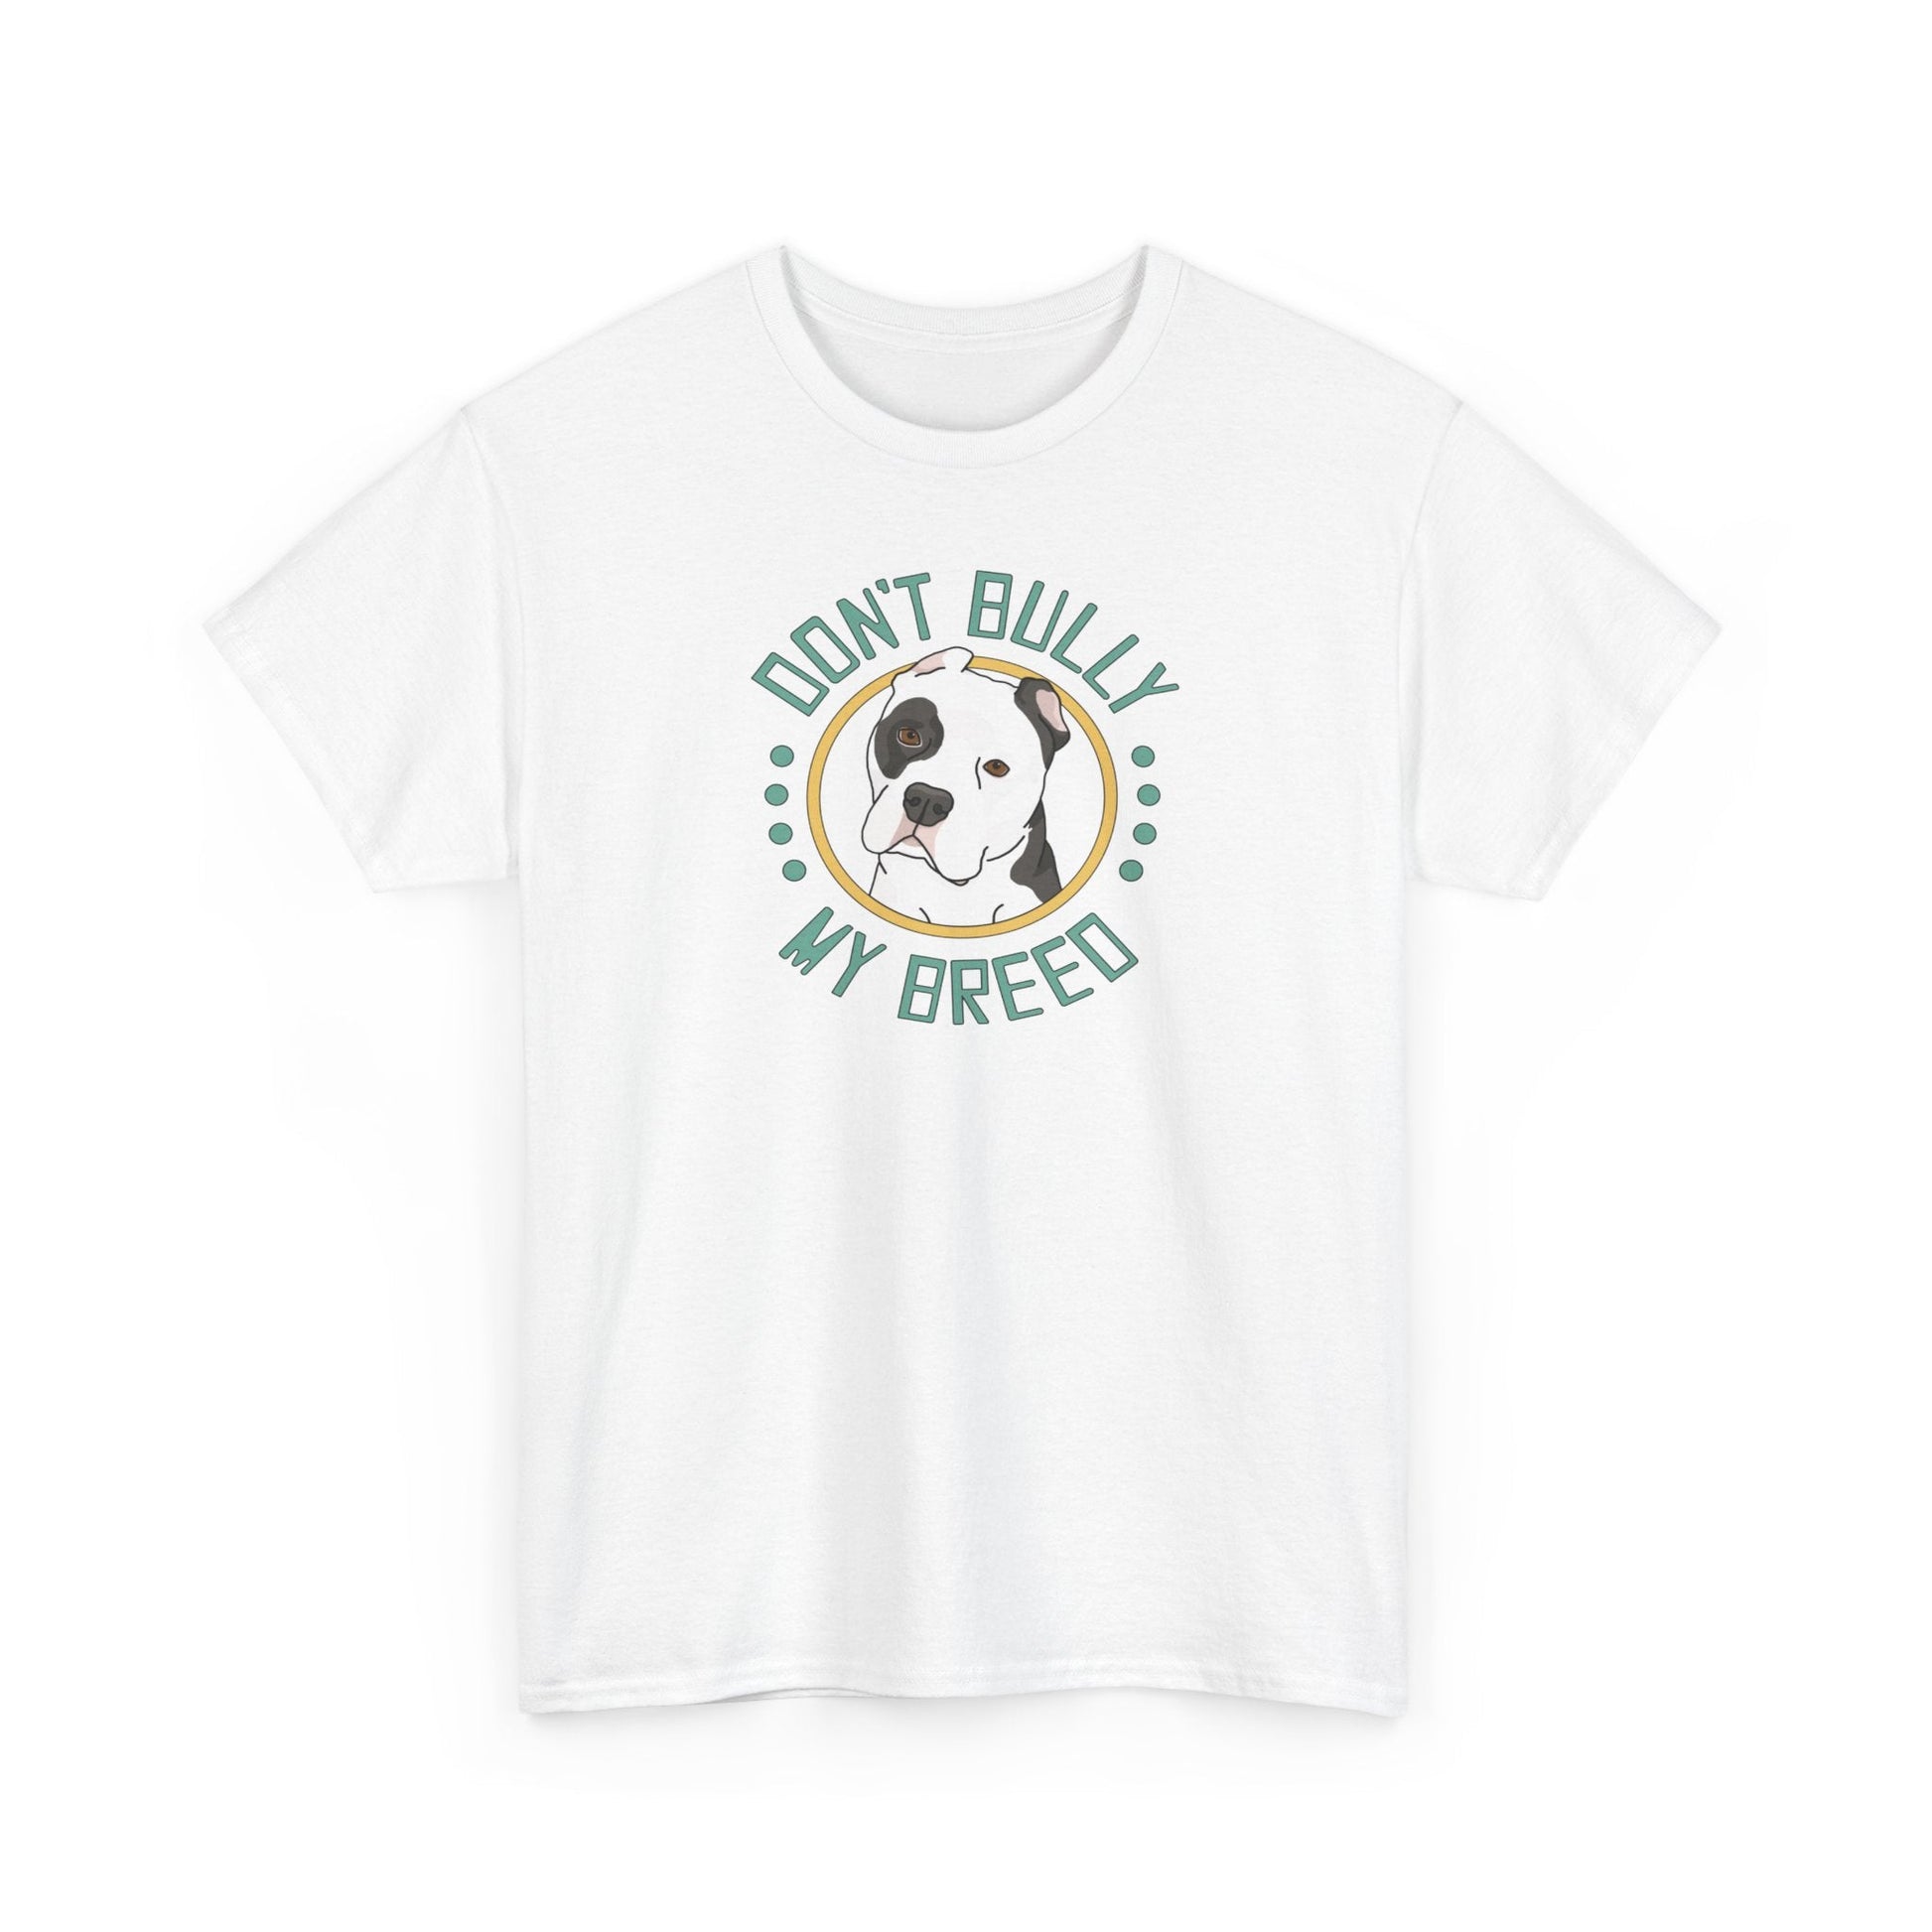 Don't Bully My Breed - Cropped Ears | Unisex T-shirt - Detezi Designs-20224868968869419178